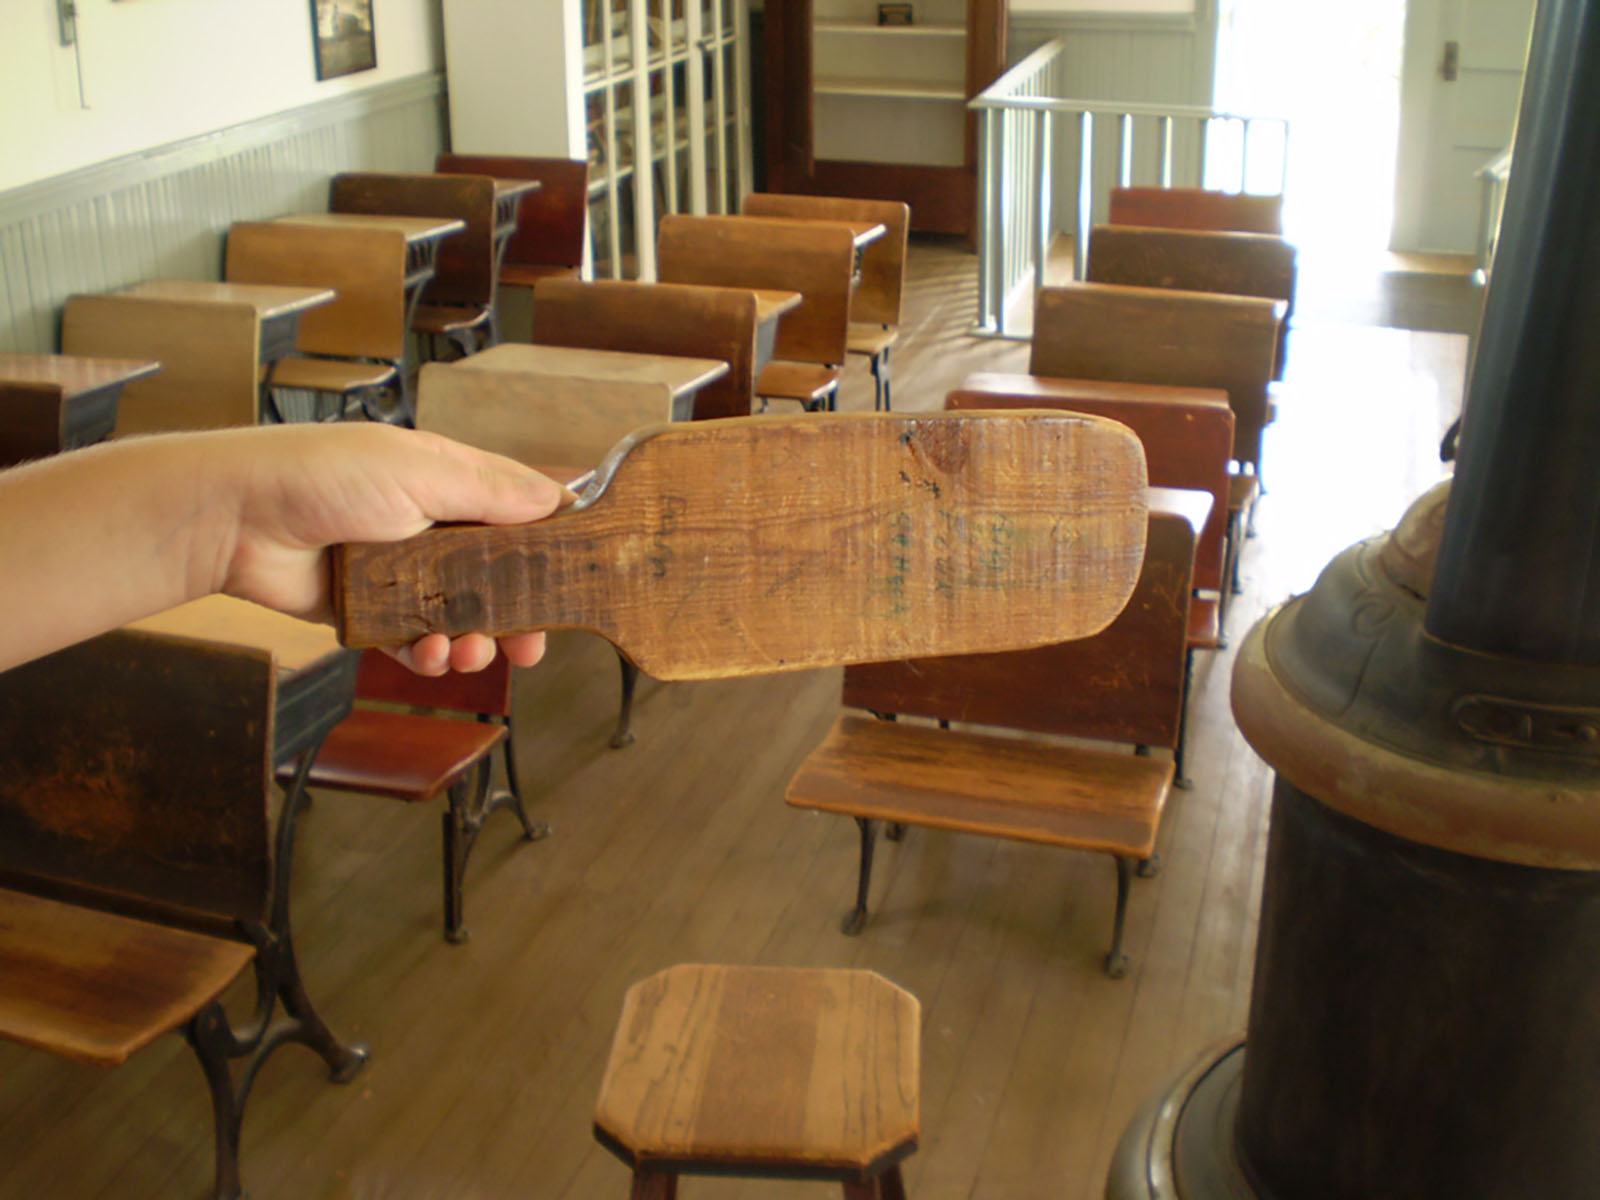 Essay on corporal punishment should be banned in schools